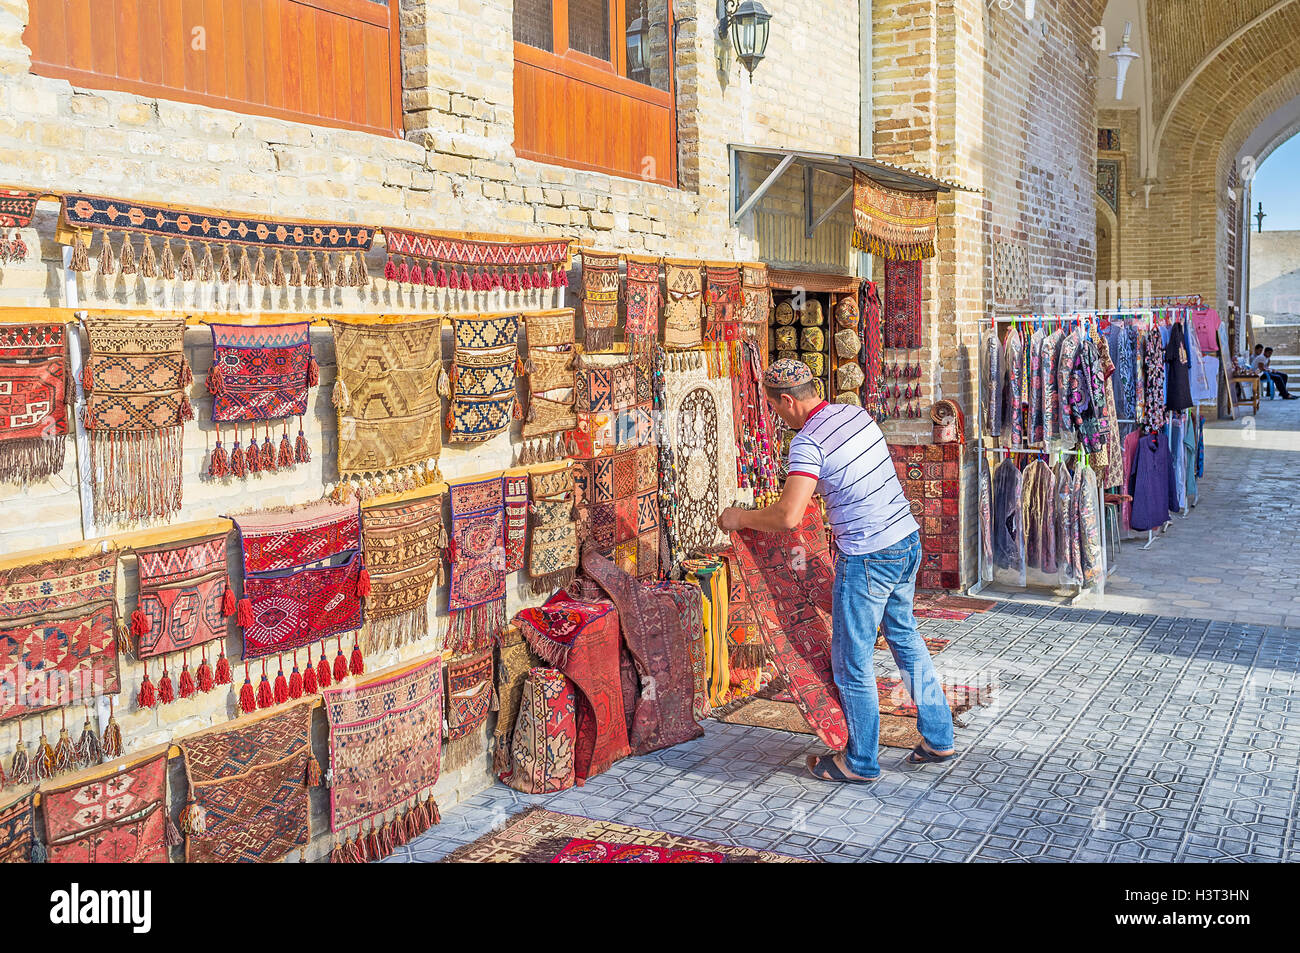 The rug merchant lay out the carpets next to his stall in Bukhara. Stock Photo